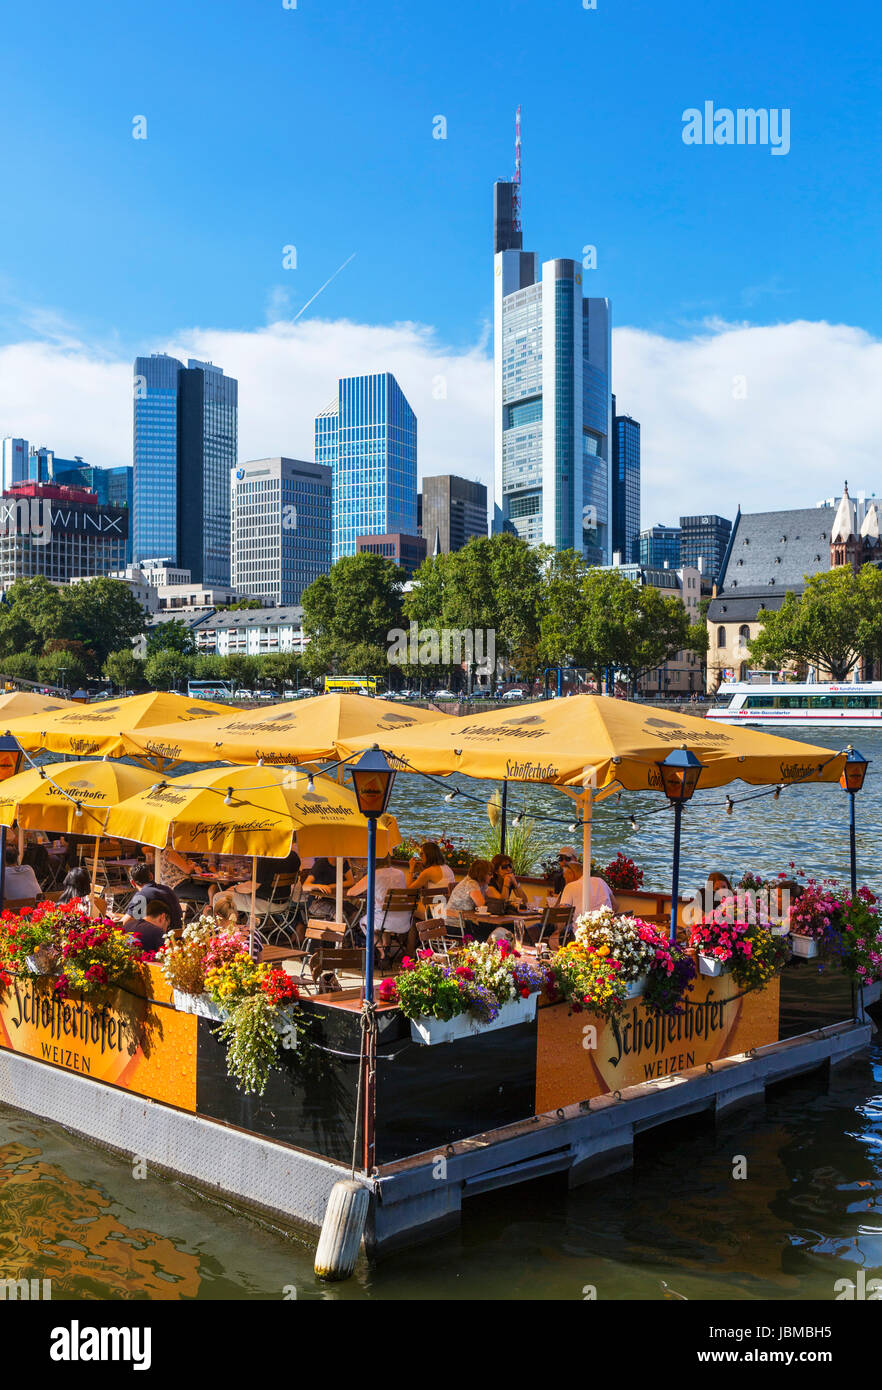 Bootshaus floating restaurant on the banks of the River Main with the skyline of financial district behind, Frankfurt, Hesse, Germany Stock Photo